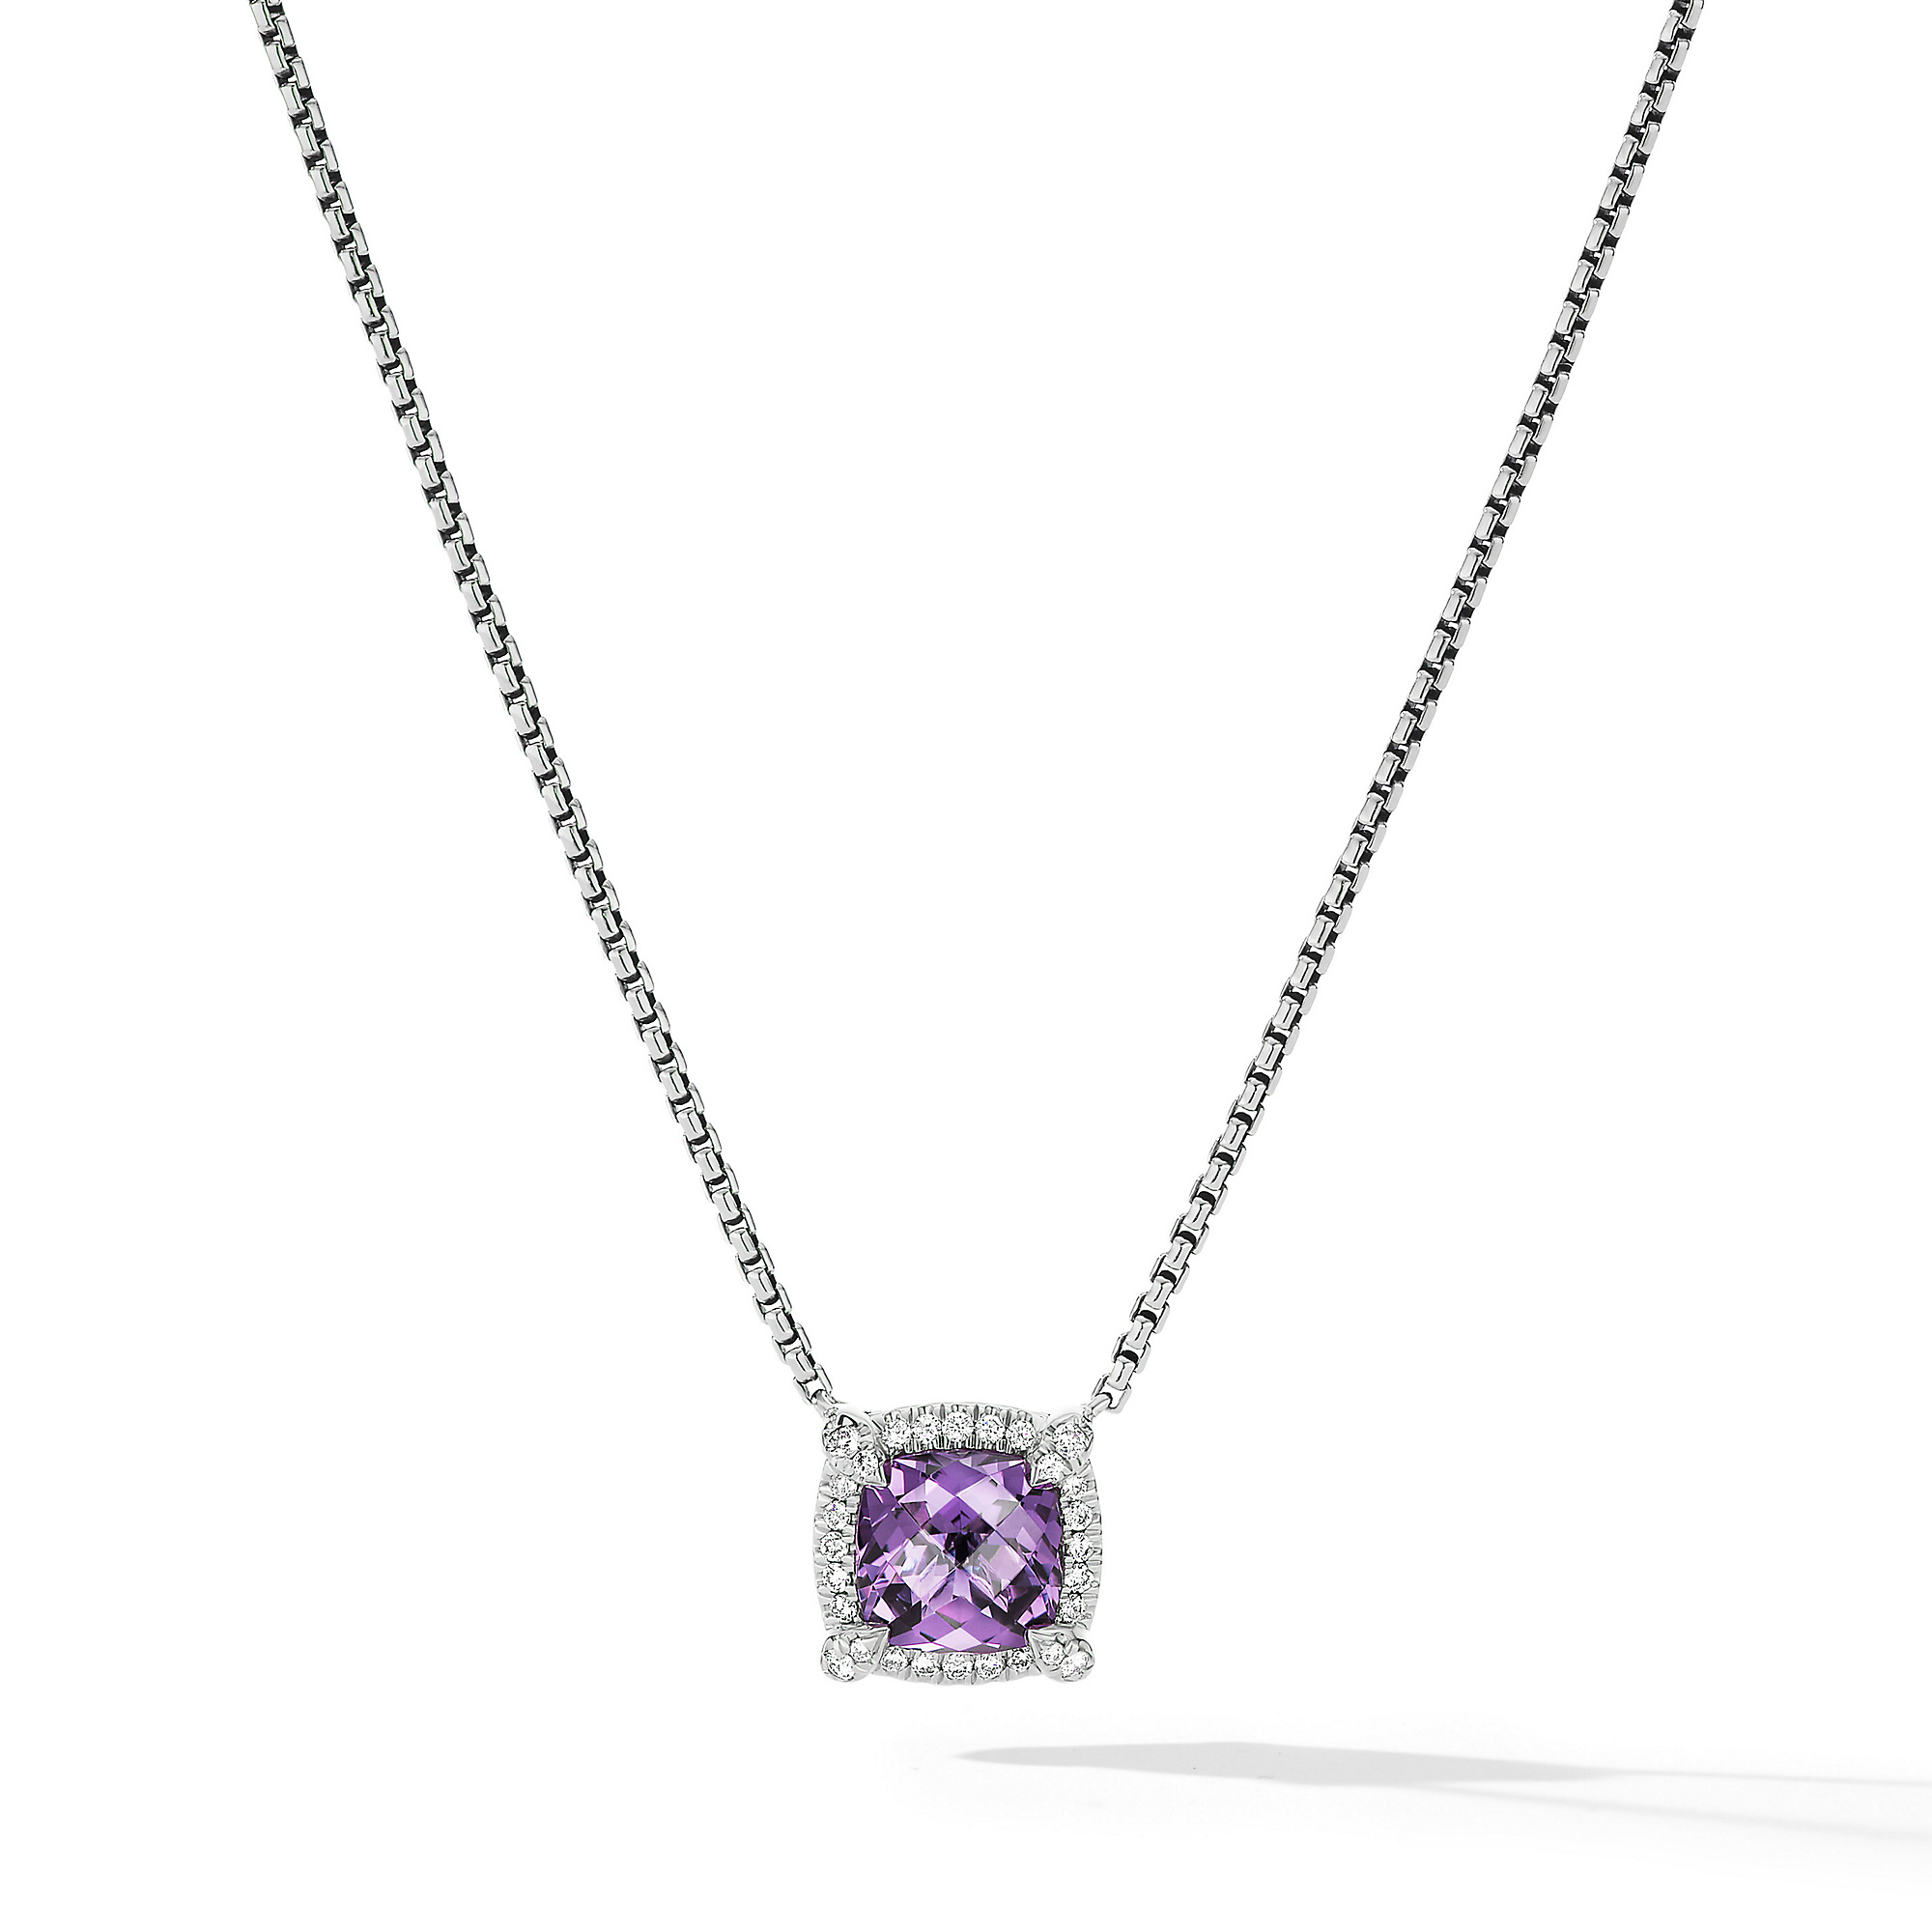 Petite Chatelaine® Pave Bezel Pendant Necklace in Sterling Silver with Amethyst and Diamonds